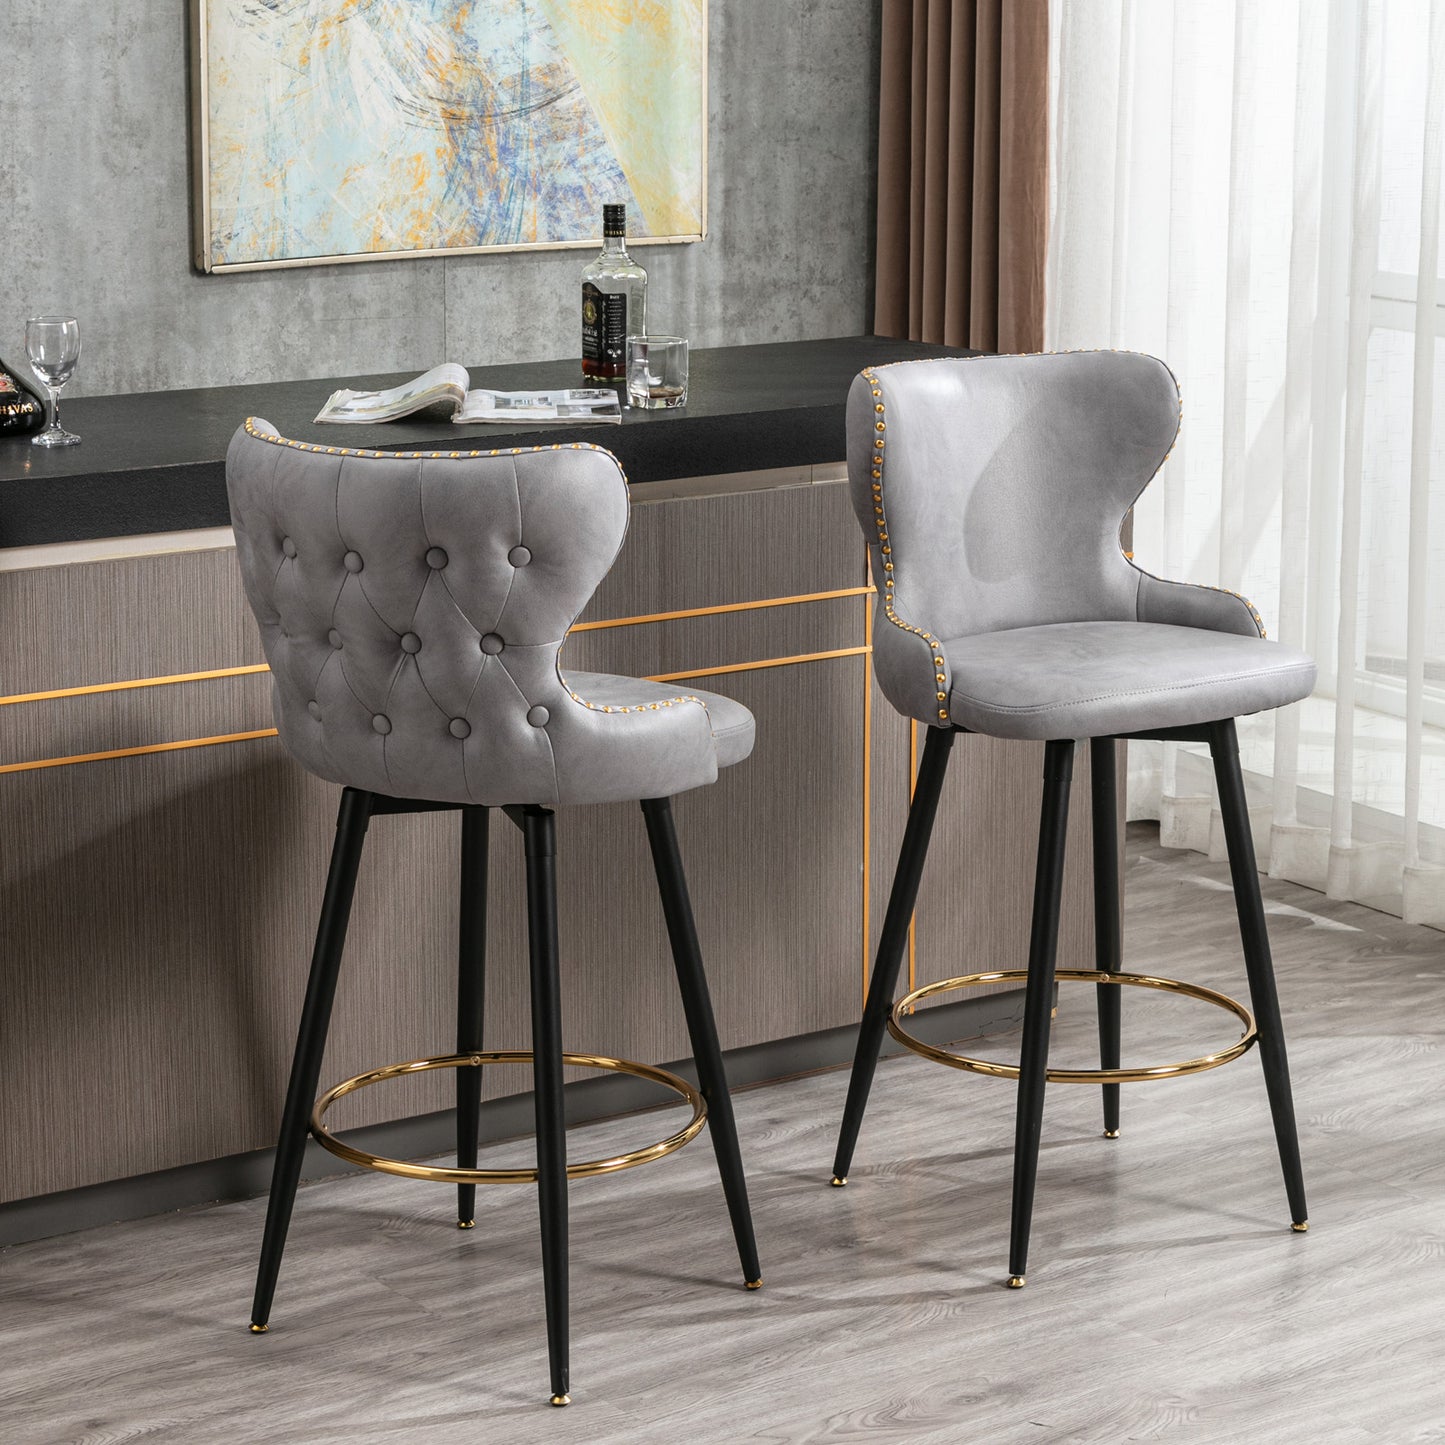 SYNGAR Modern Bar Chairs Set of 2, Contemporary Fabric Faux Leather Bar Stools Tool, Counter Stools with Tufted Nailheads and Wood Legs, High End Style Bar Chairs, khaki